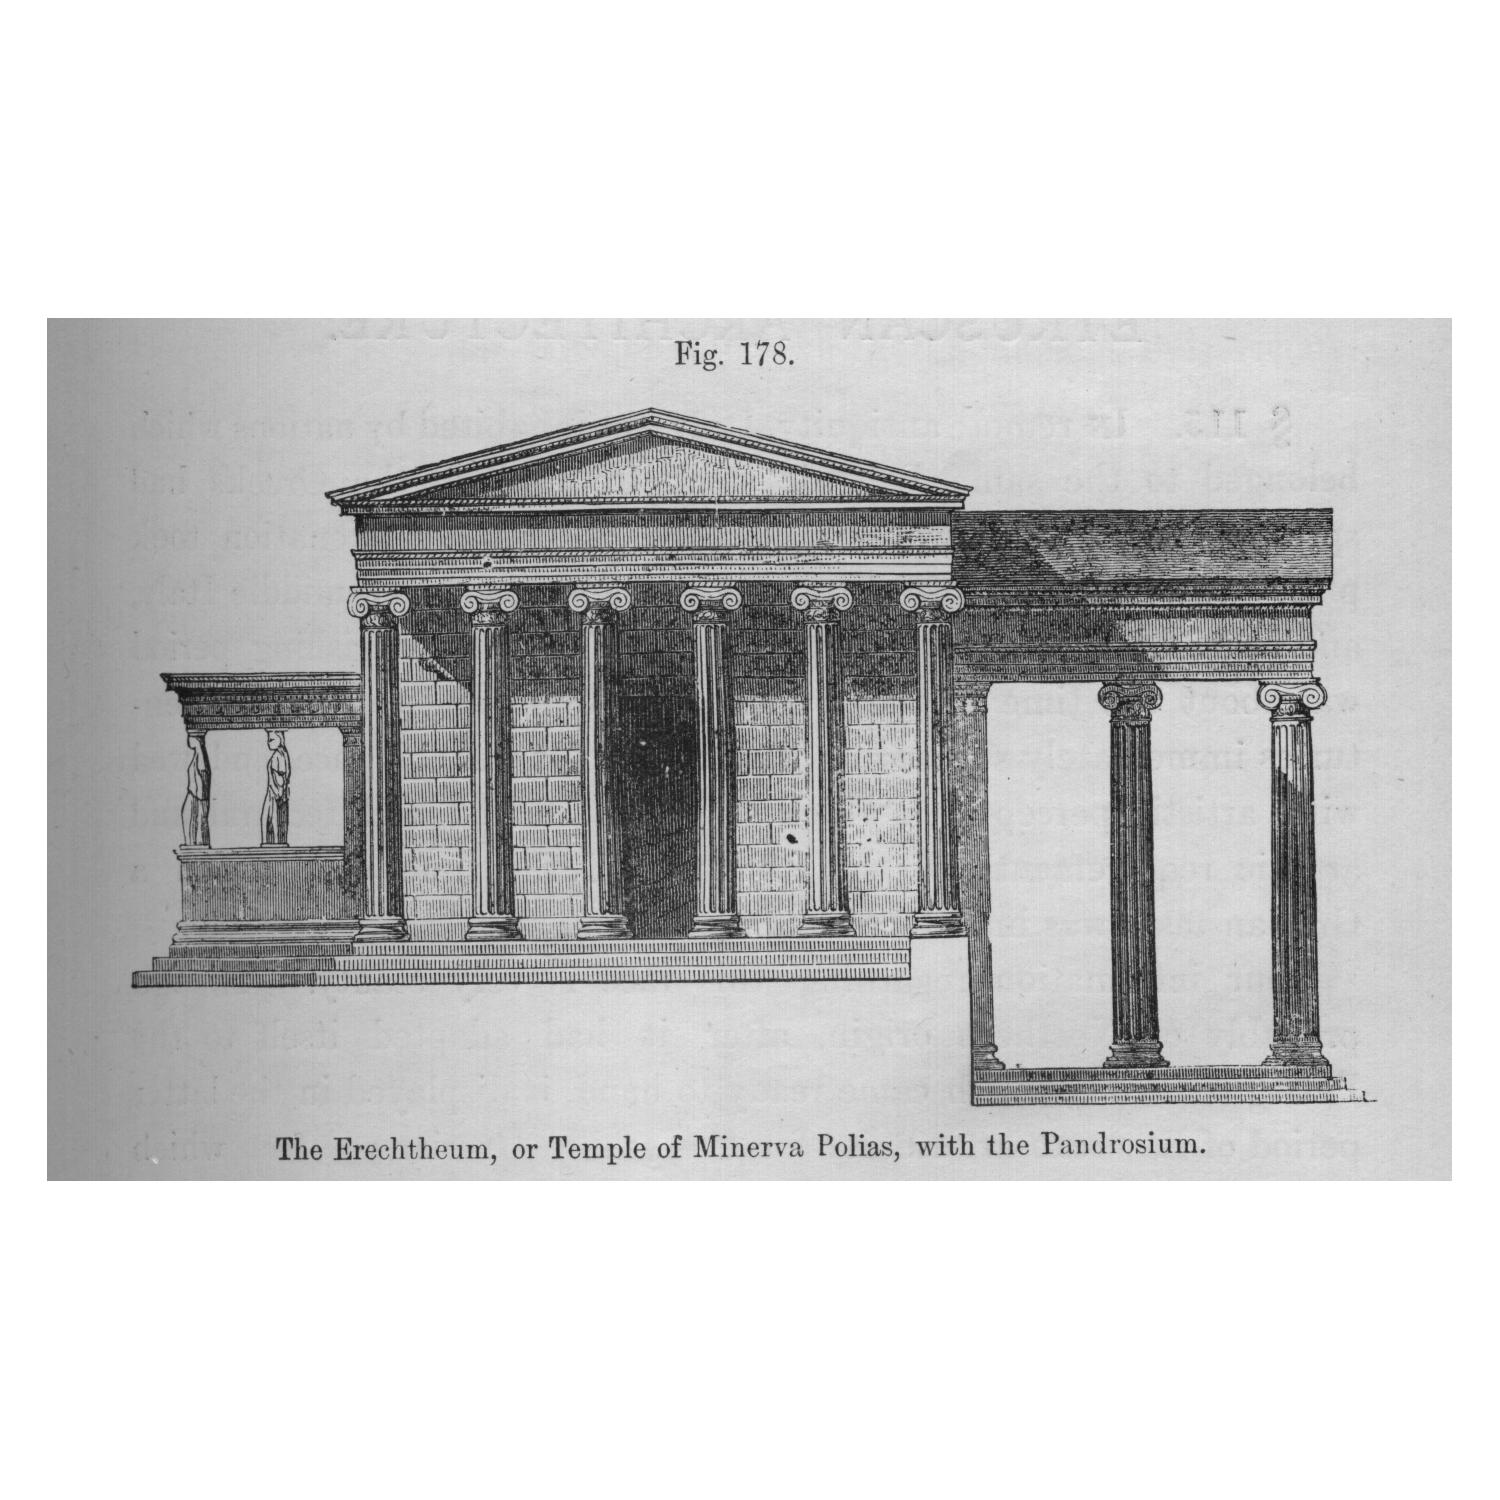 An architectural rendering of the Erechtheum in Athens, which provided inspiration for the ionic columns, caryatid porches and overall design of the Field Museum. From the 1809 book A Handbook of Architectural Styles.